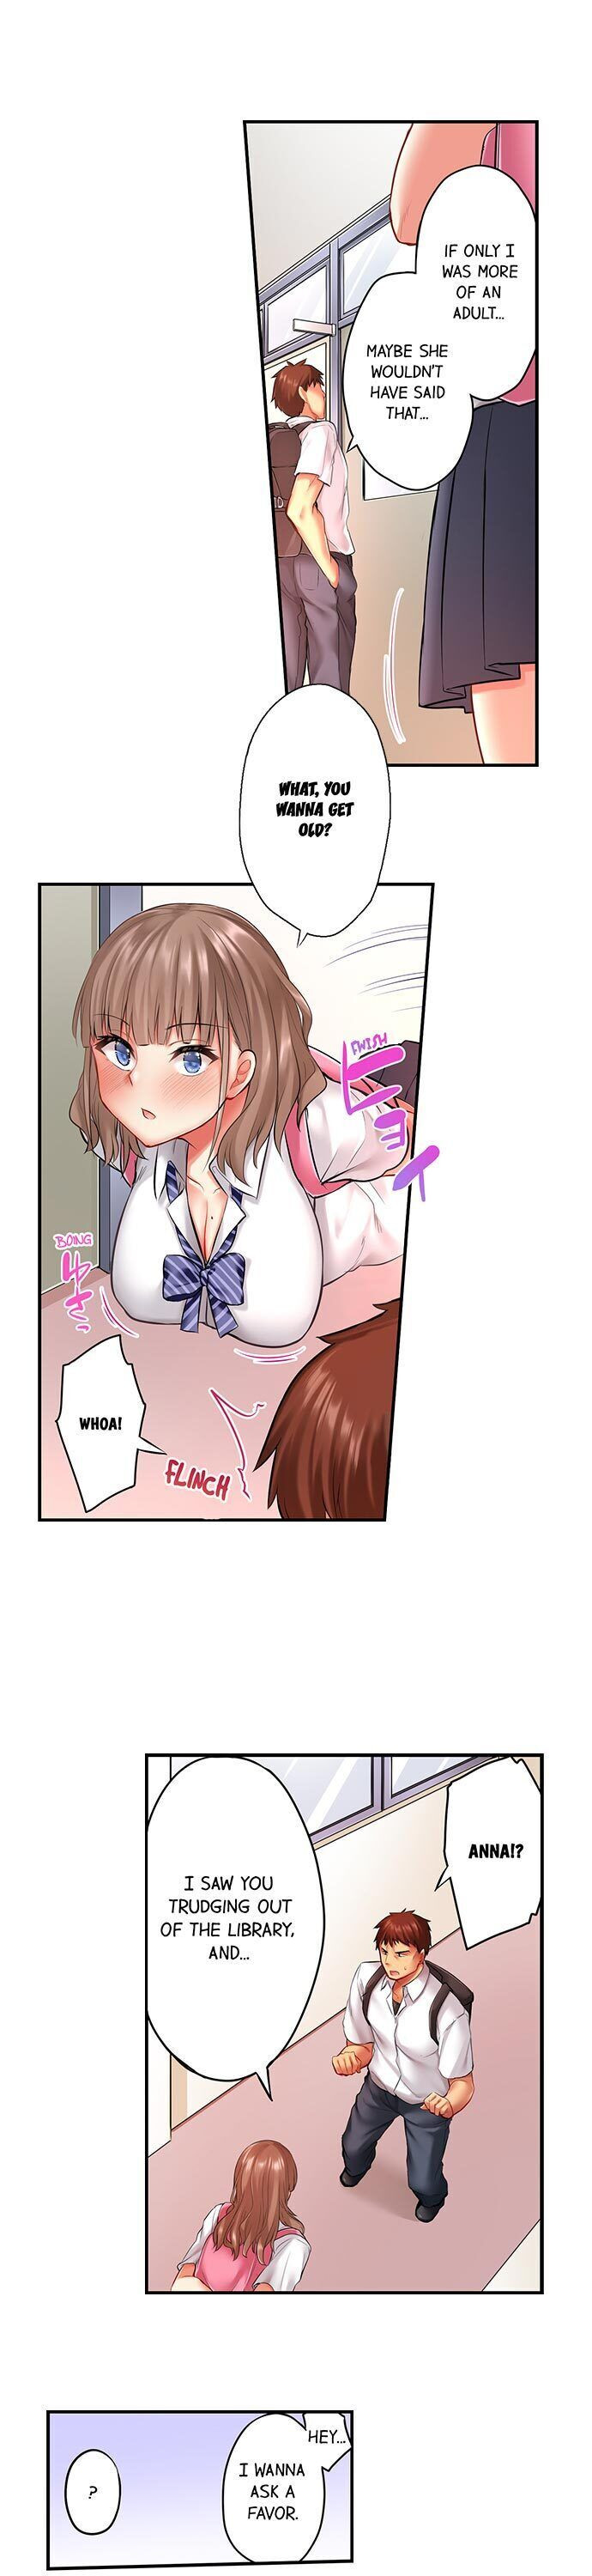 If I See Your Boobs, There’s No Way I Won’t Lick Them… - Chapter 13 Page 6